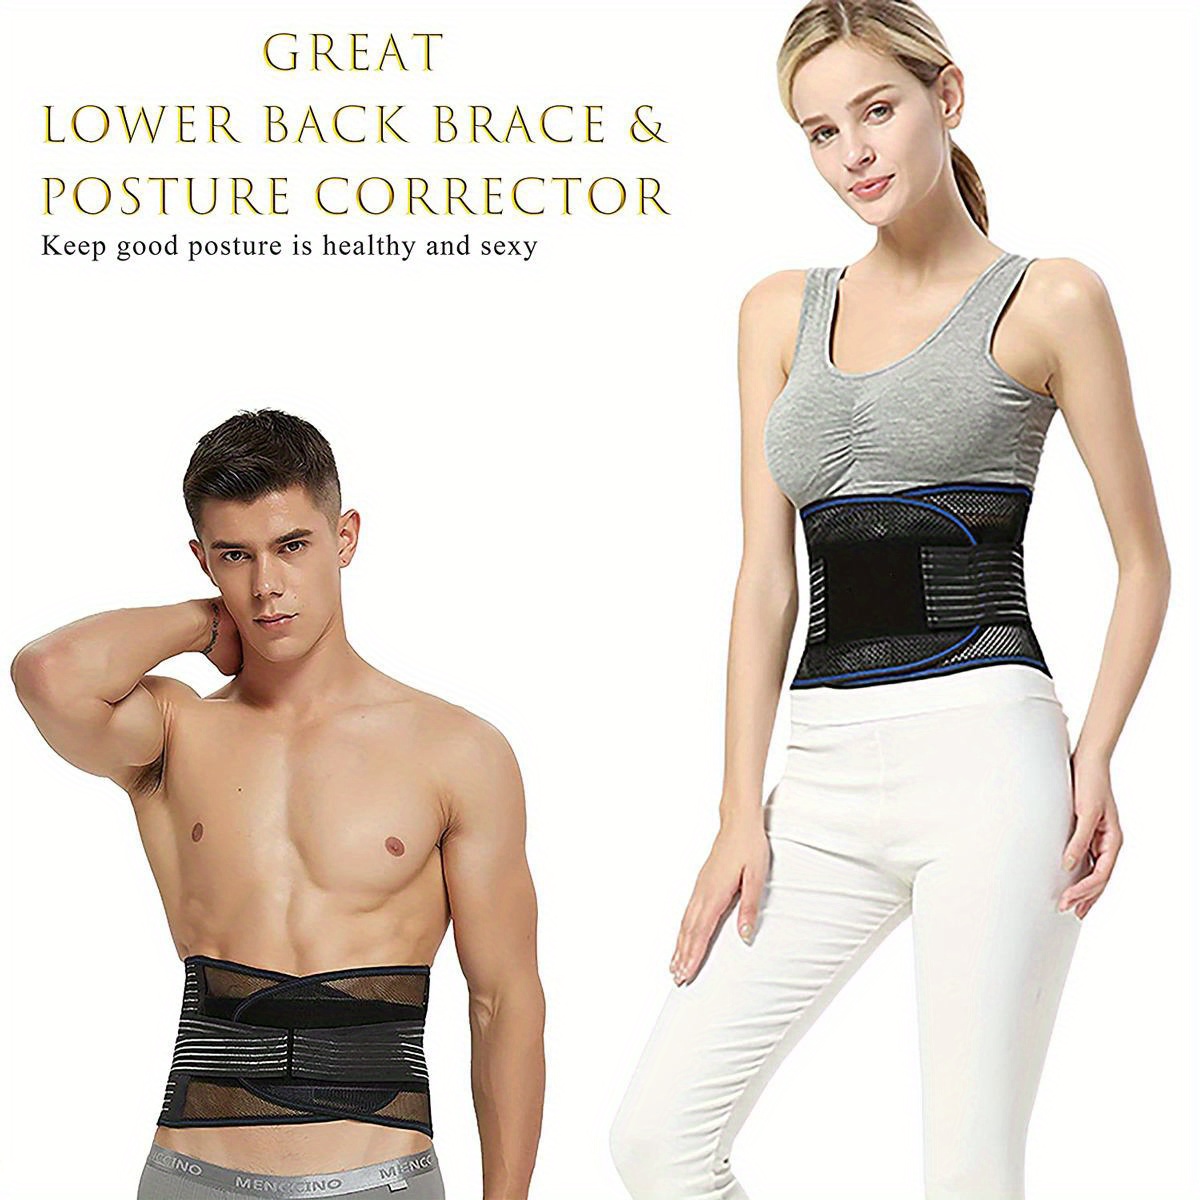 Small Back Brace for Women and Men, Cooling Fabric Lumbar Support Belt,  Ergonomic Compression Brace for Back Support (X-Small/Small)